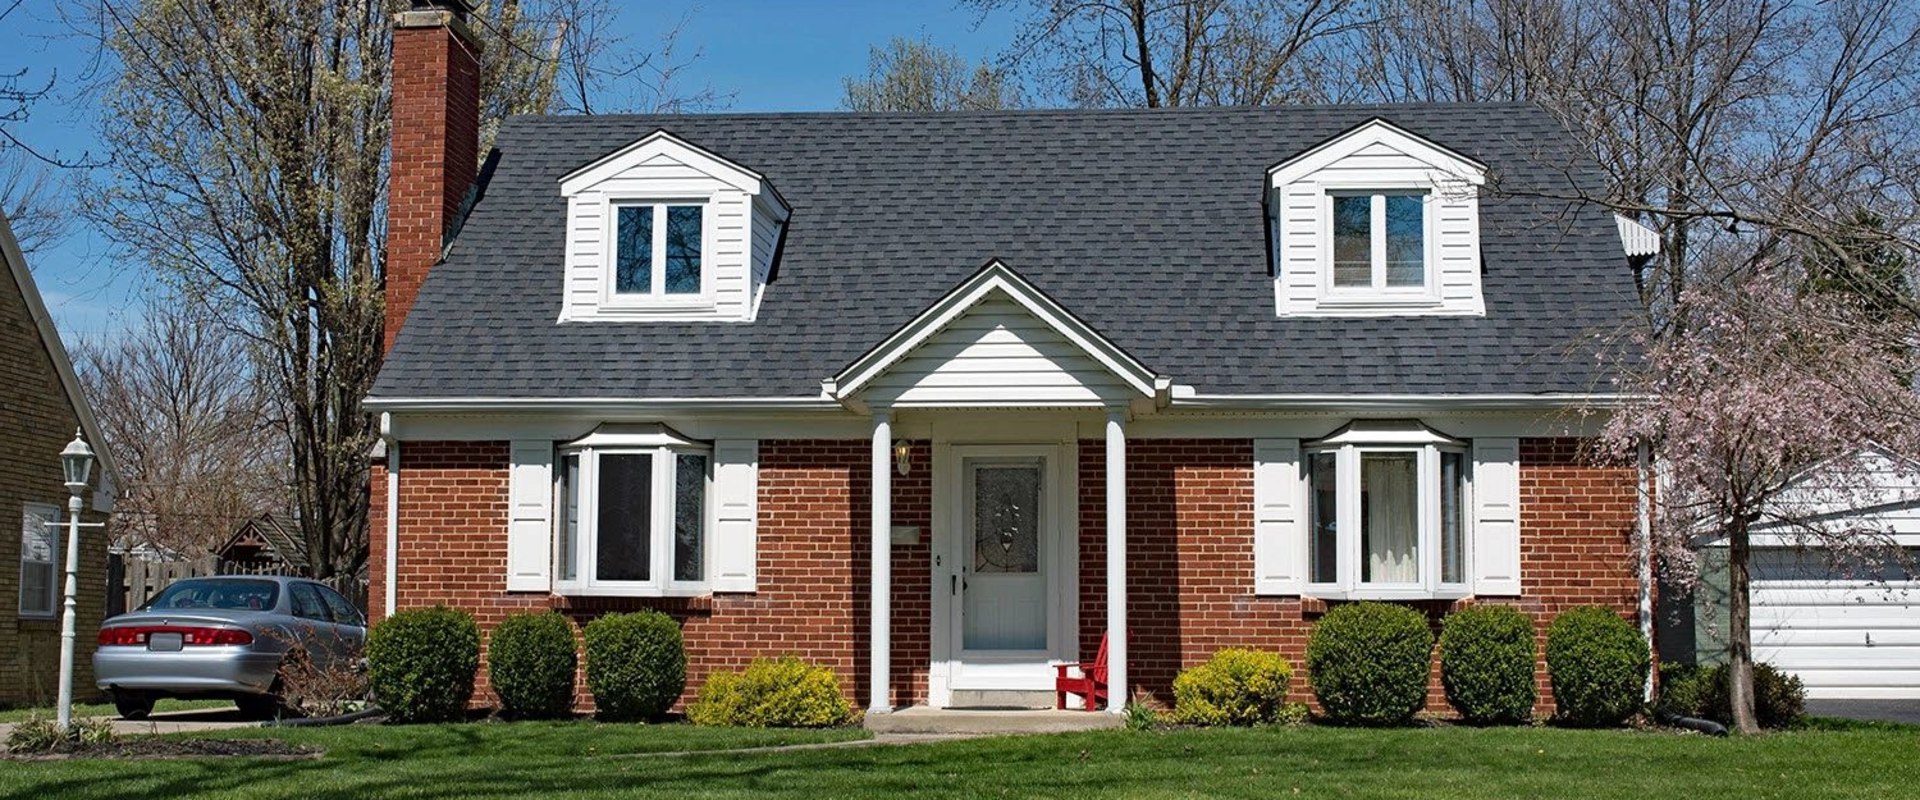 Roof Repair And Home Remodel Transforming Your Bellbrook, OH Home